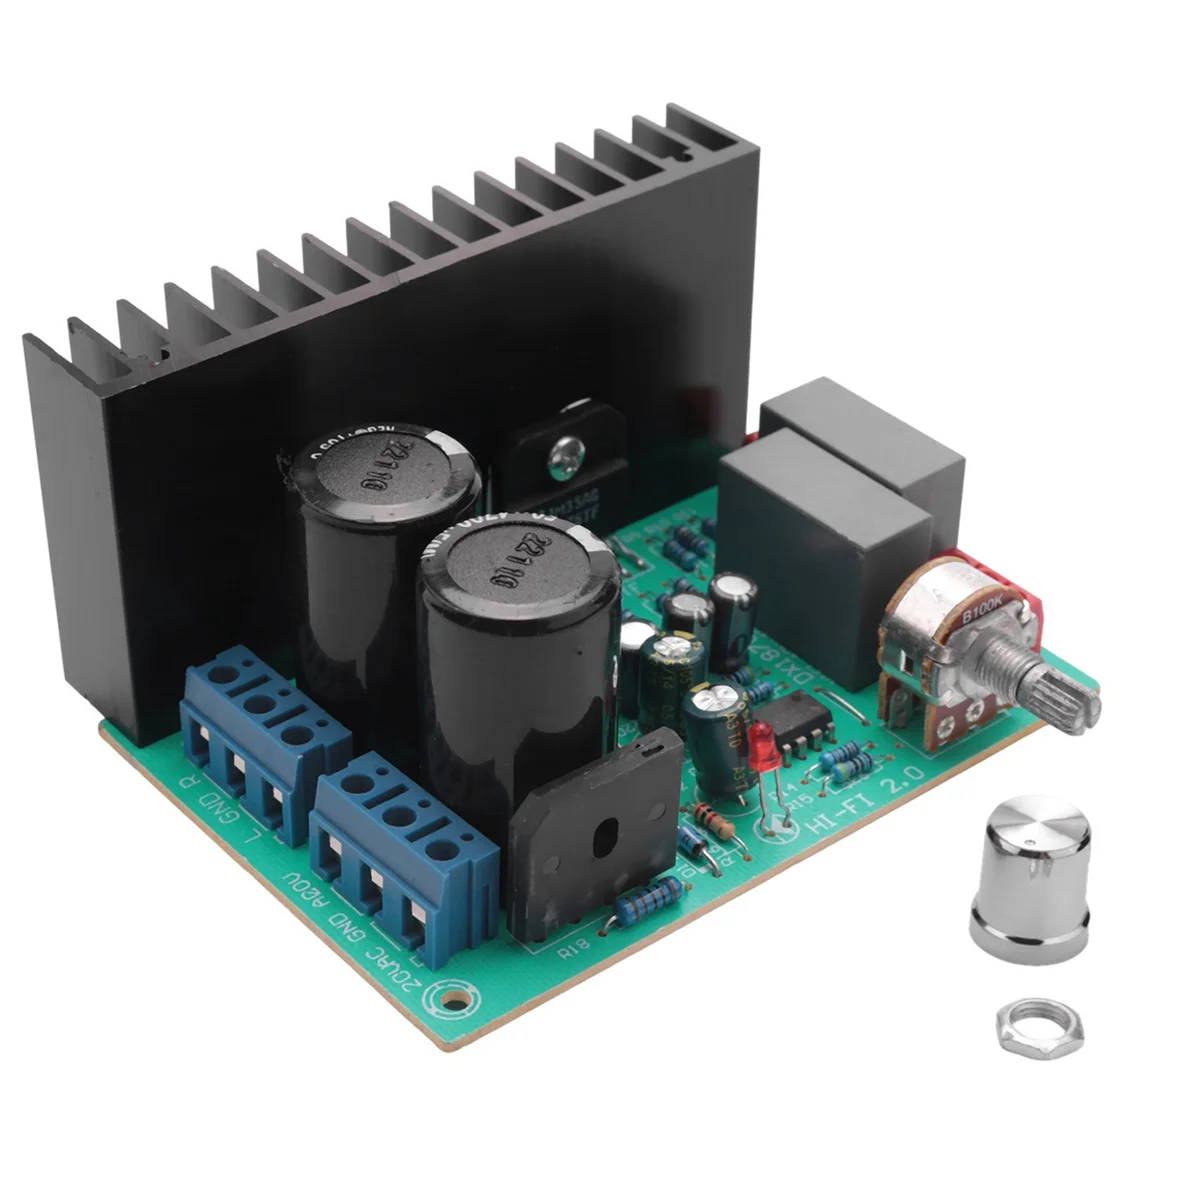 

30W+30W LM1876 Stereo Audio Power 4558 Amplifier Board 2.0 Stereo Class AB Home Theater AMP Dual